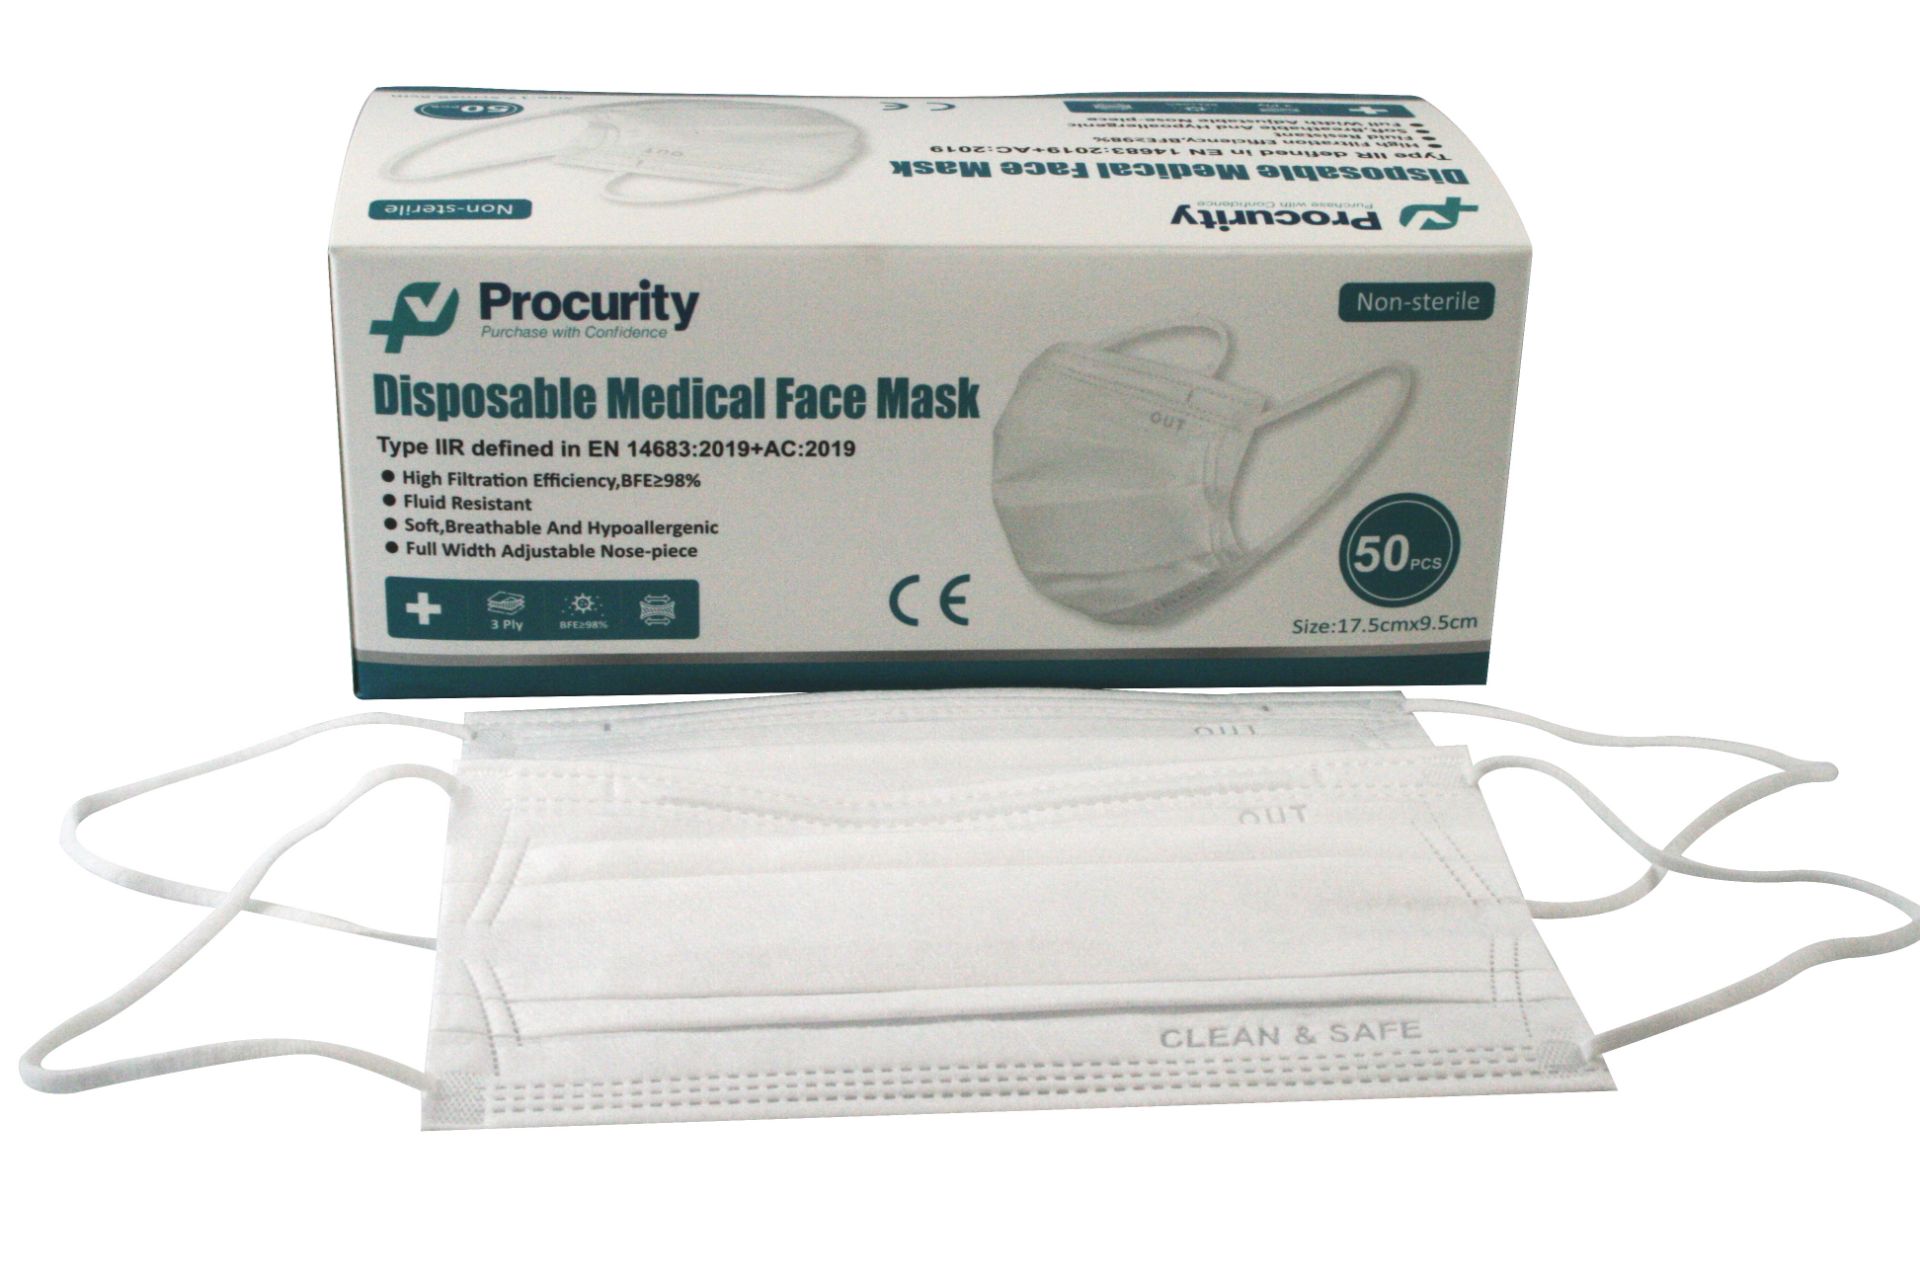 Medical Grade Type IIR disposable face masks: x 2000 - Image 2 of 5